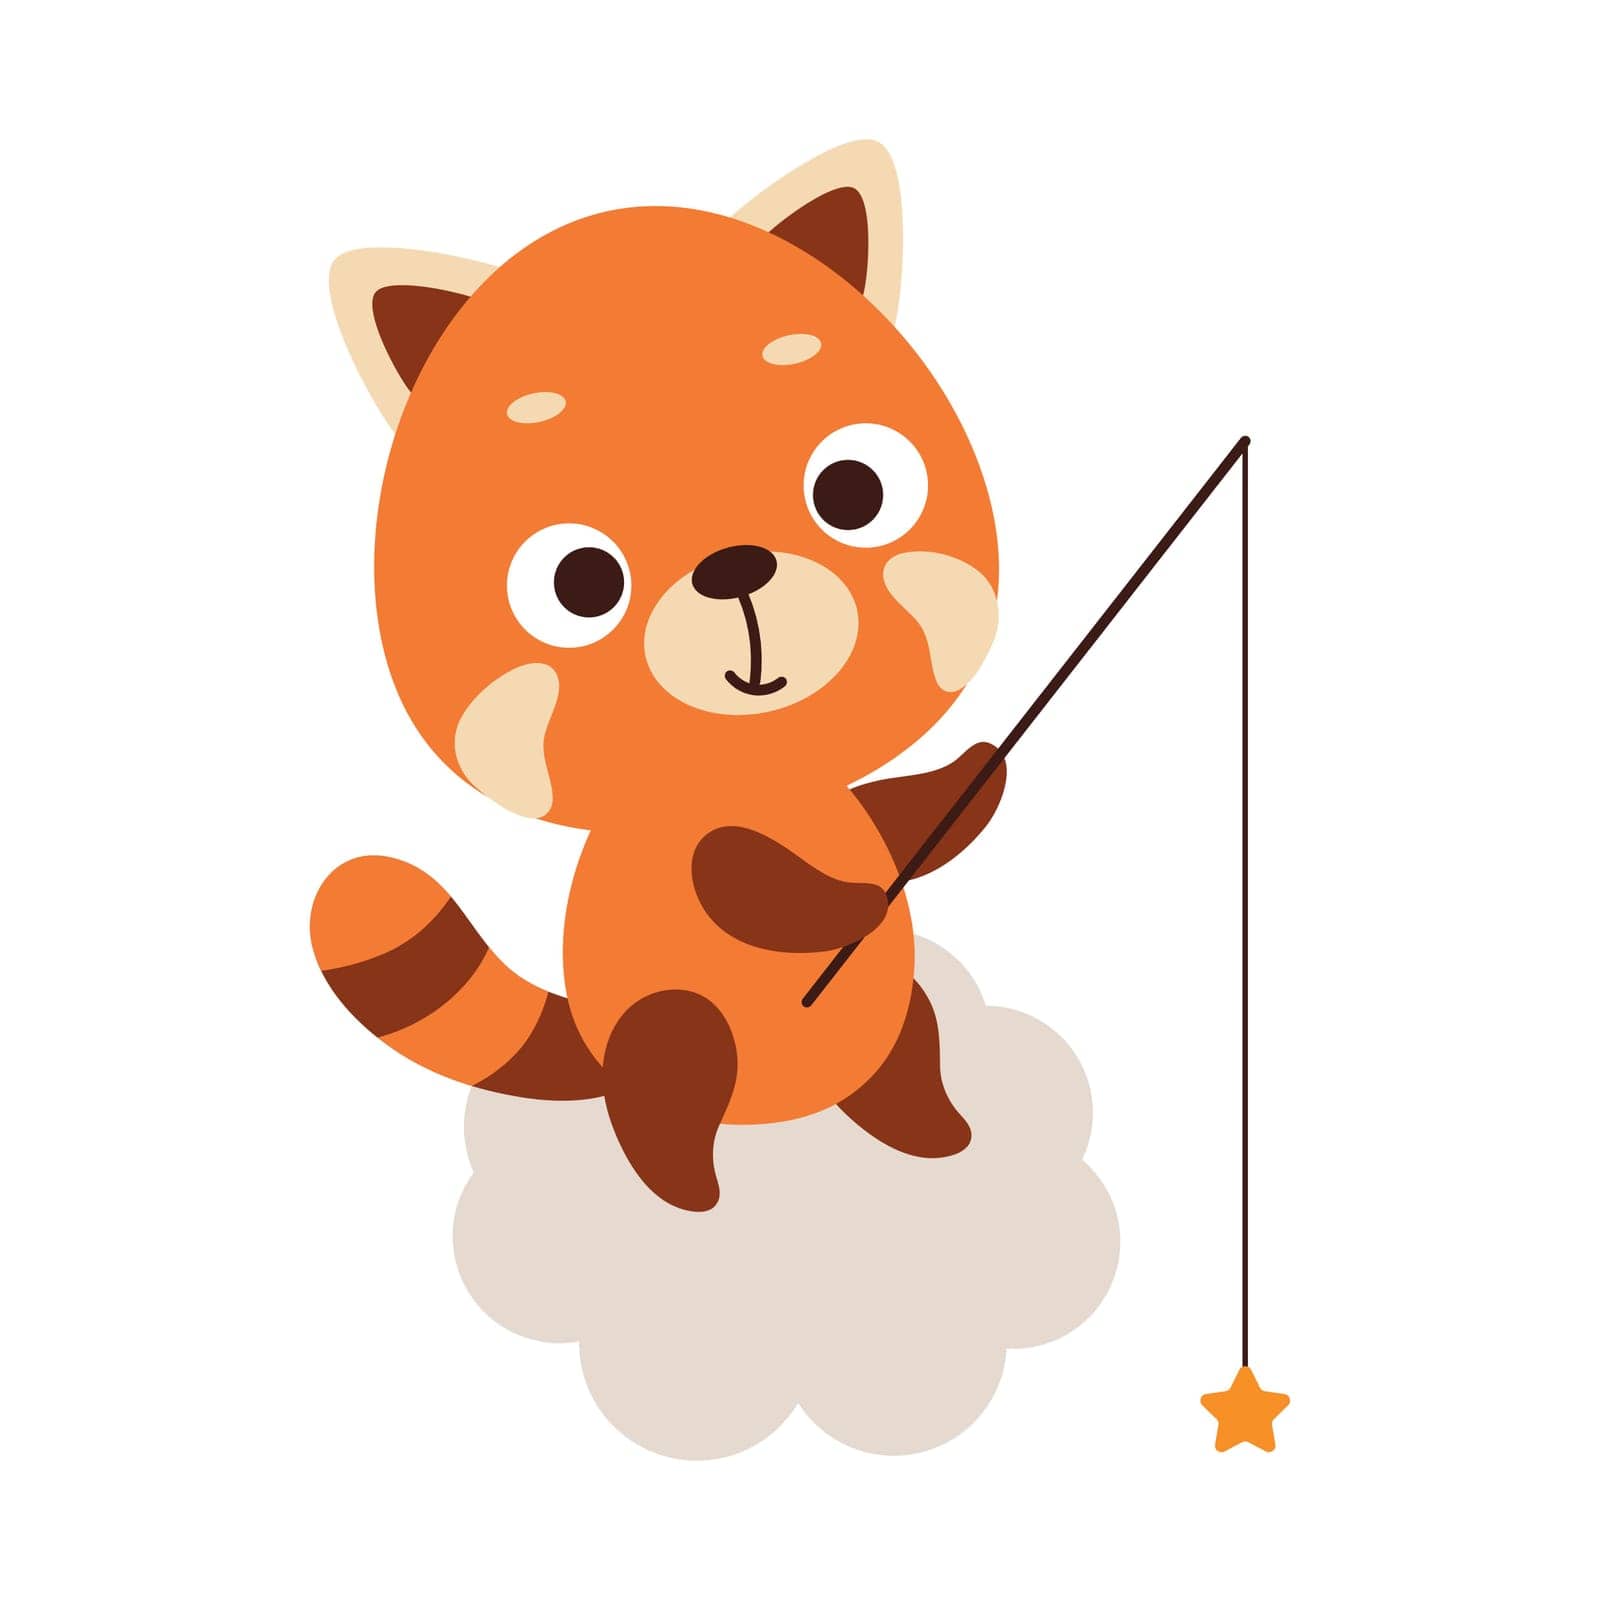 Cute little red panda fishing star on cloud. Cartoon animal character for kids t-shirt, nursery decoration, baby shower, greeting cards, invitations, house interior. Vector stock illustration by Melnyk